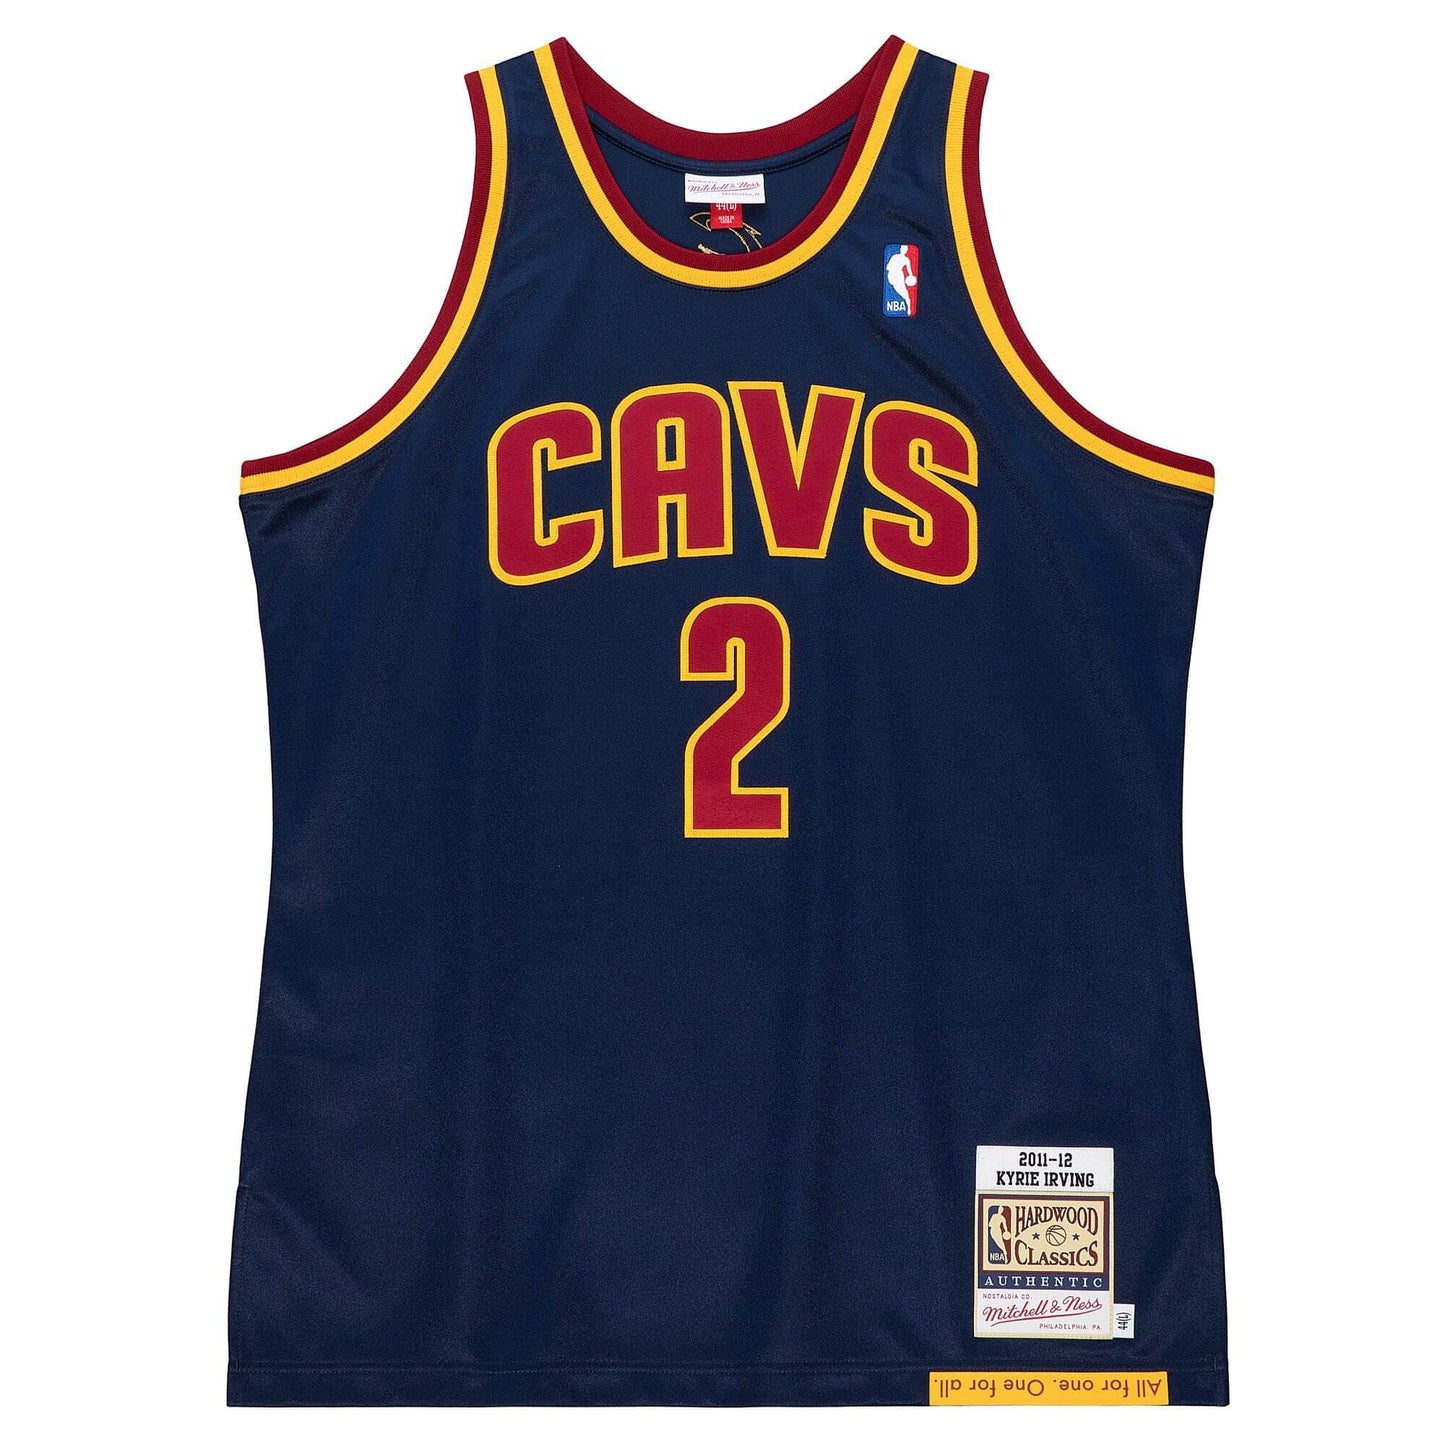 Authentic Kyrie Irving Cleveland Cavaliers Alternate 2011-12 Jersey